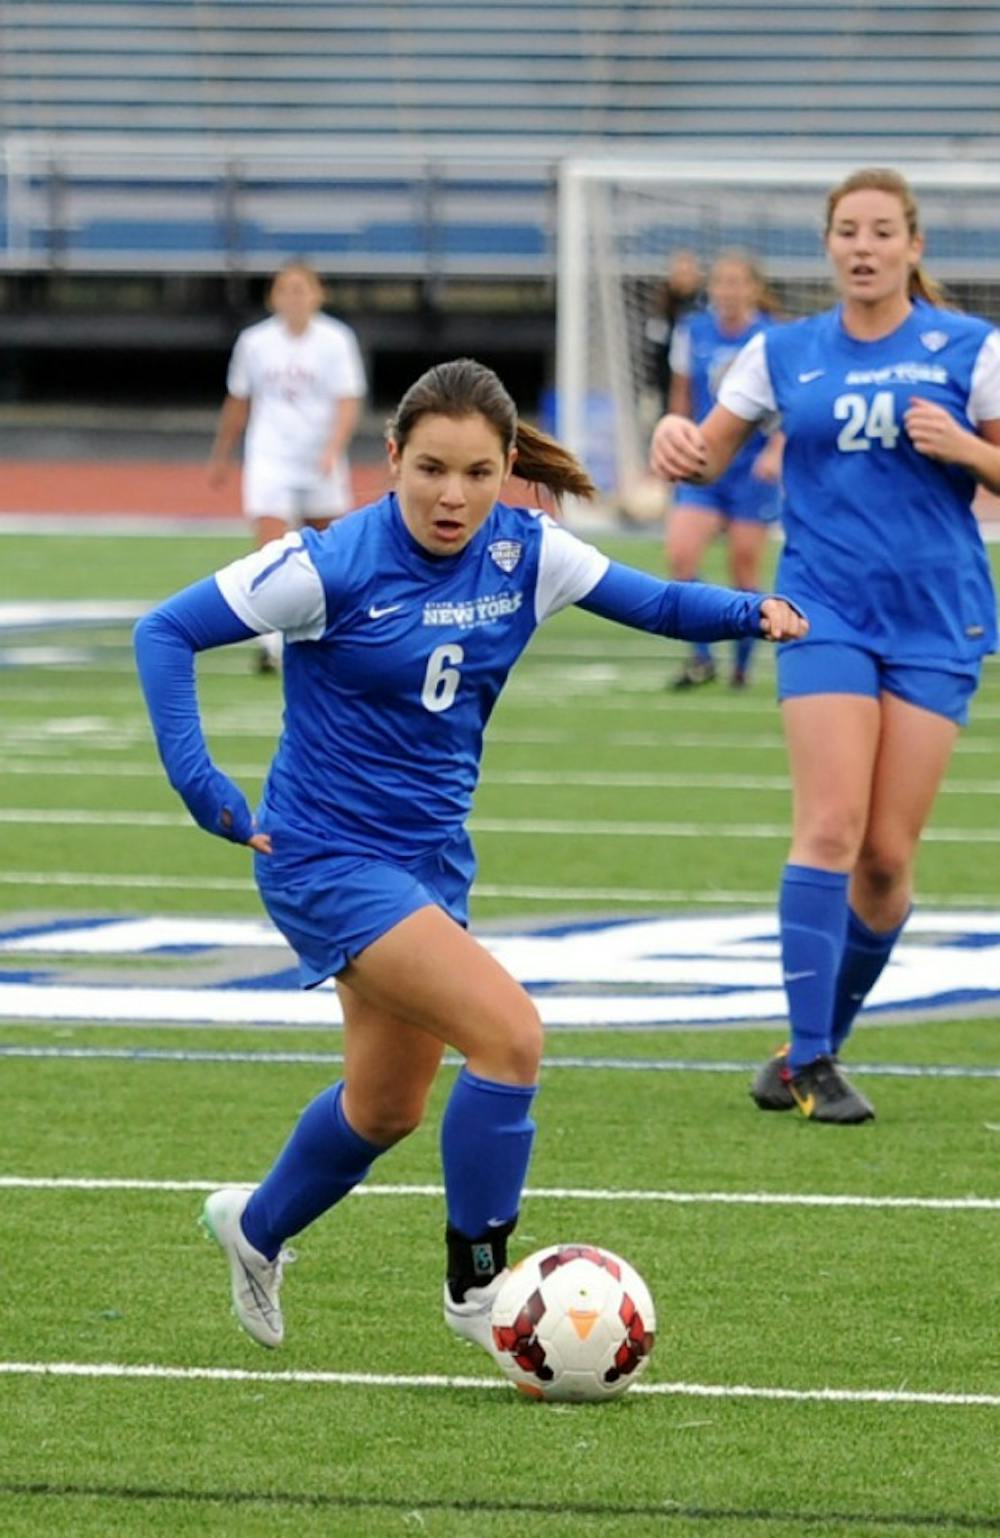 <p>Sophomore midfielder Julia Benati (6) pushes the ball down field in a game last season. She had the first goal of the Bulls' 3-0 win over Binghamton Friday. </p>